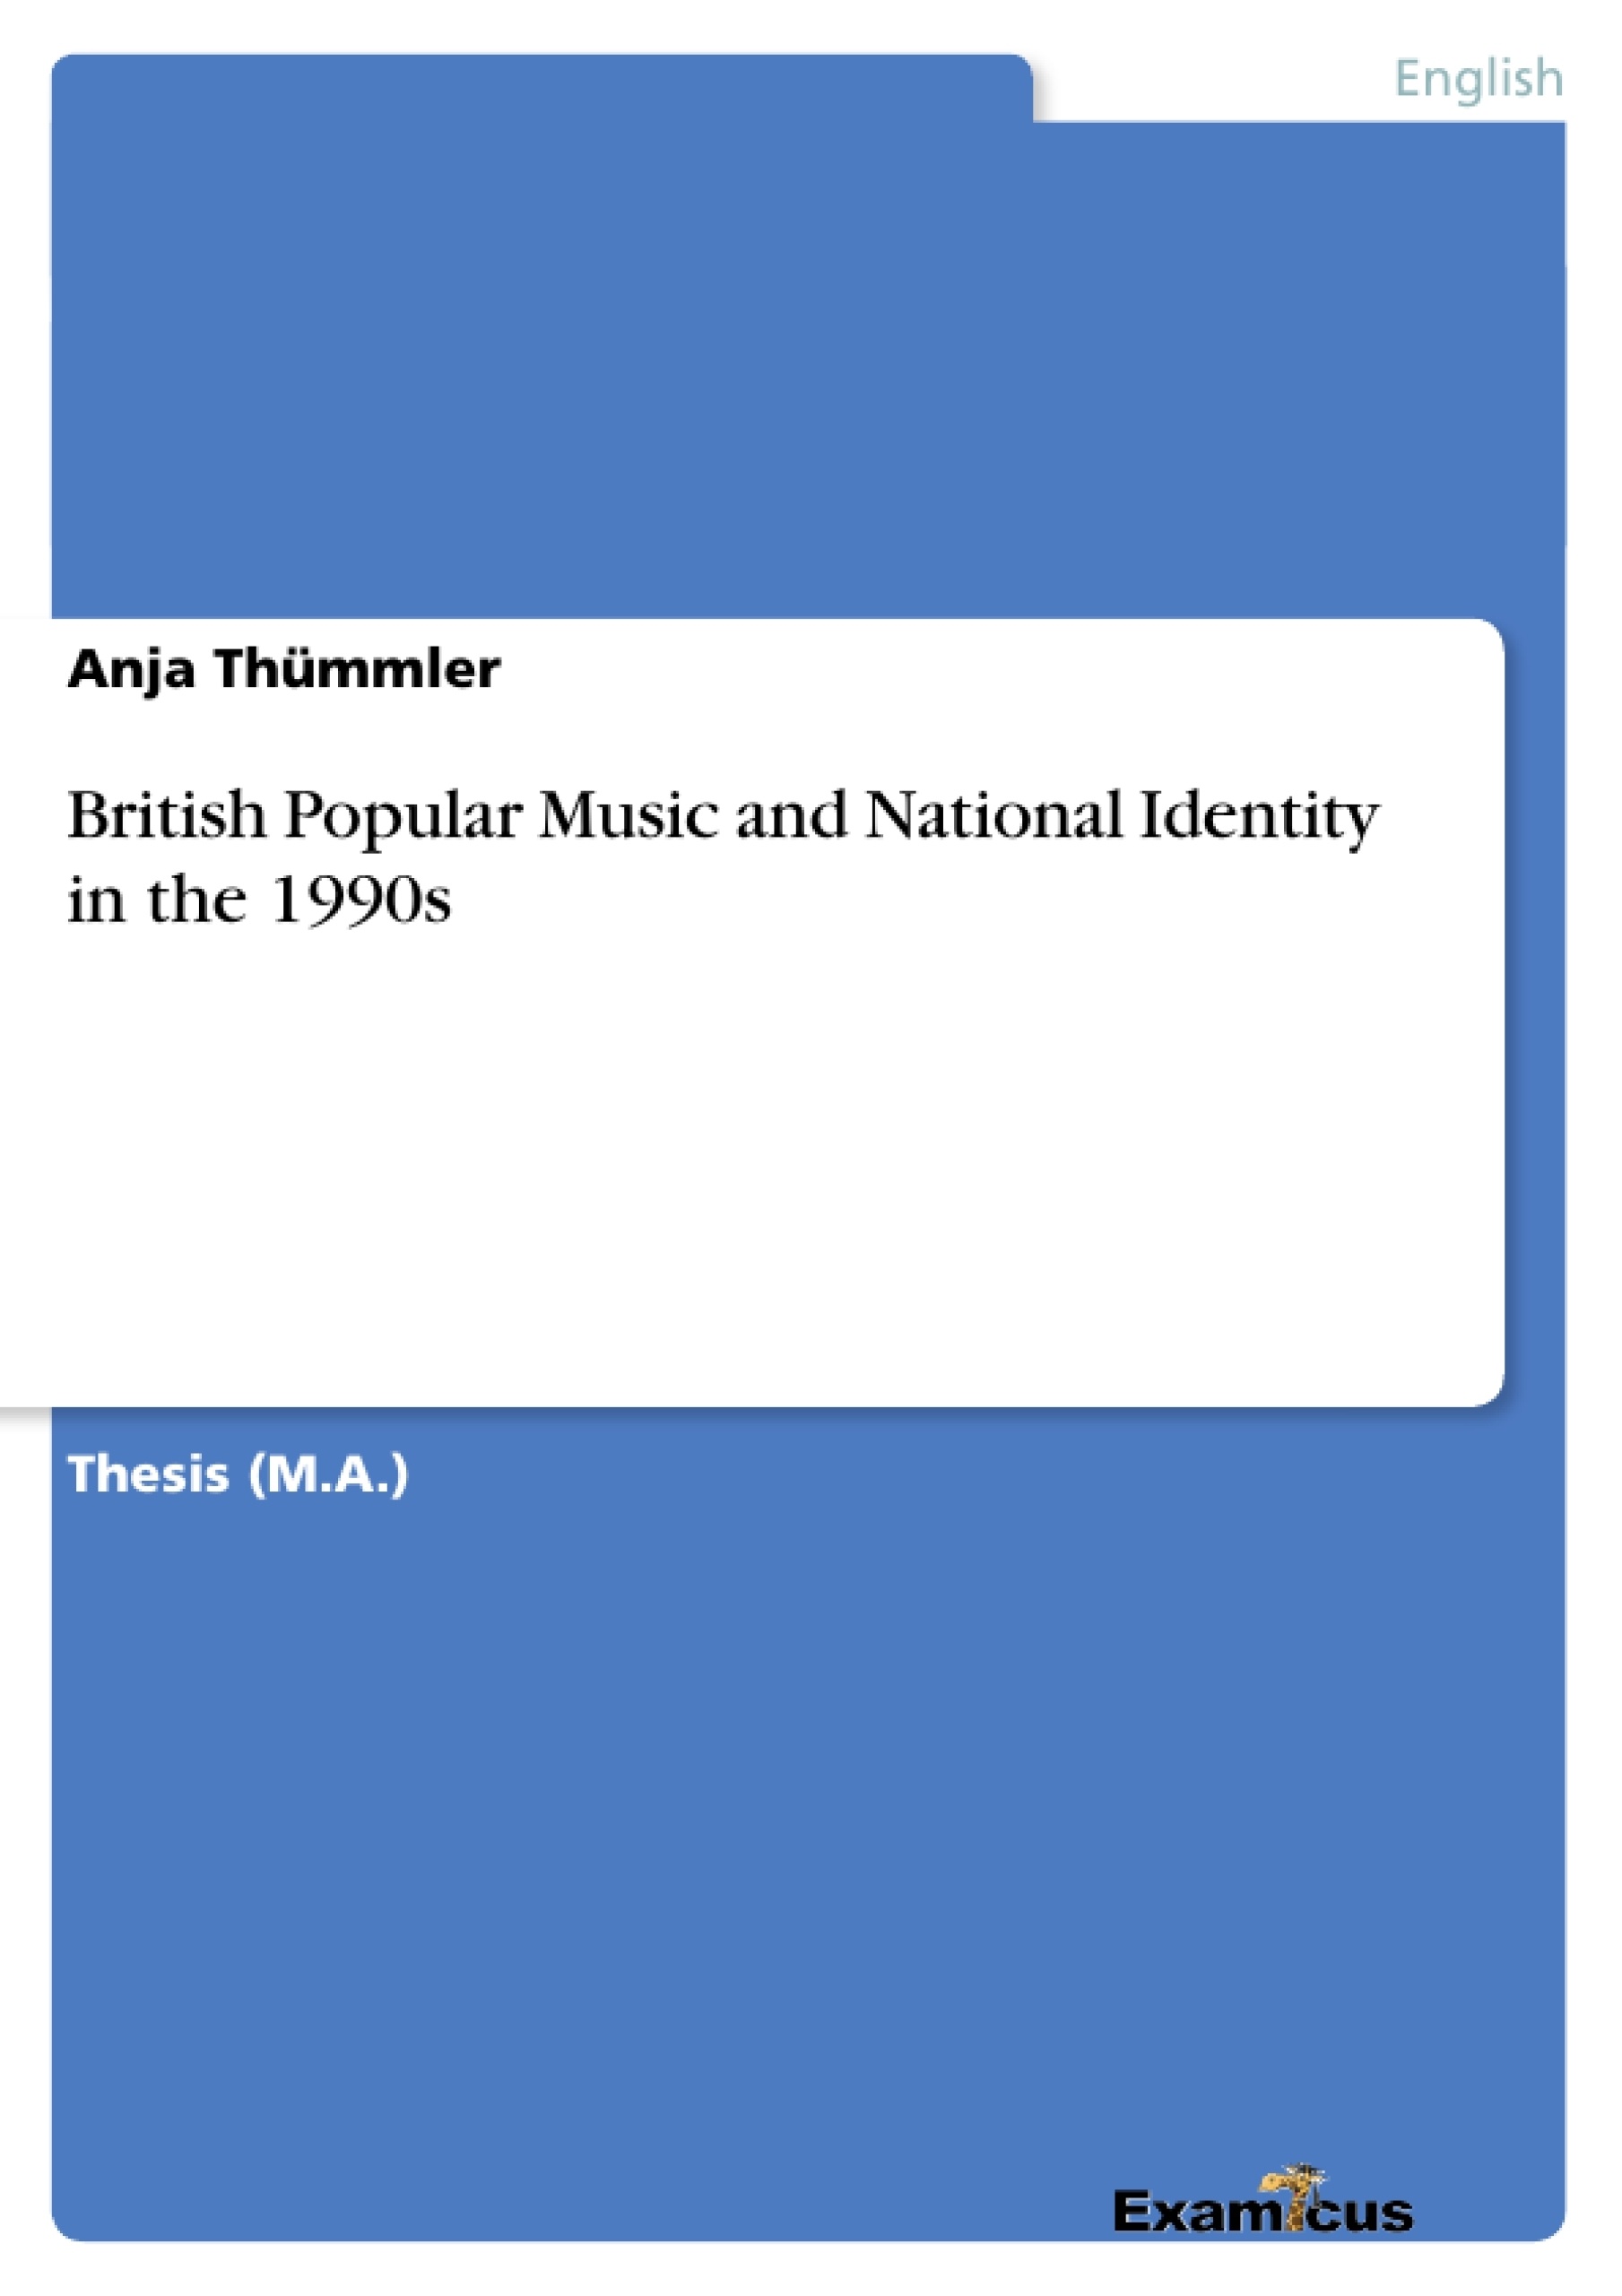 Title: British Popular Music and National Identity in the 1990s